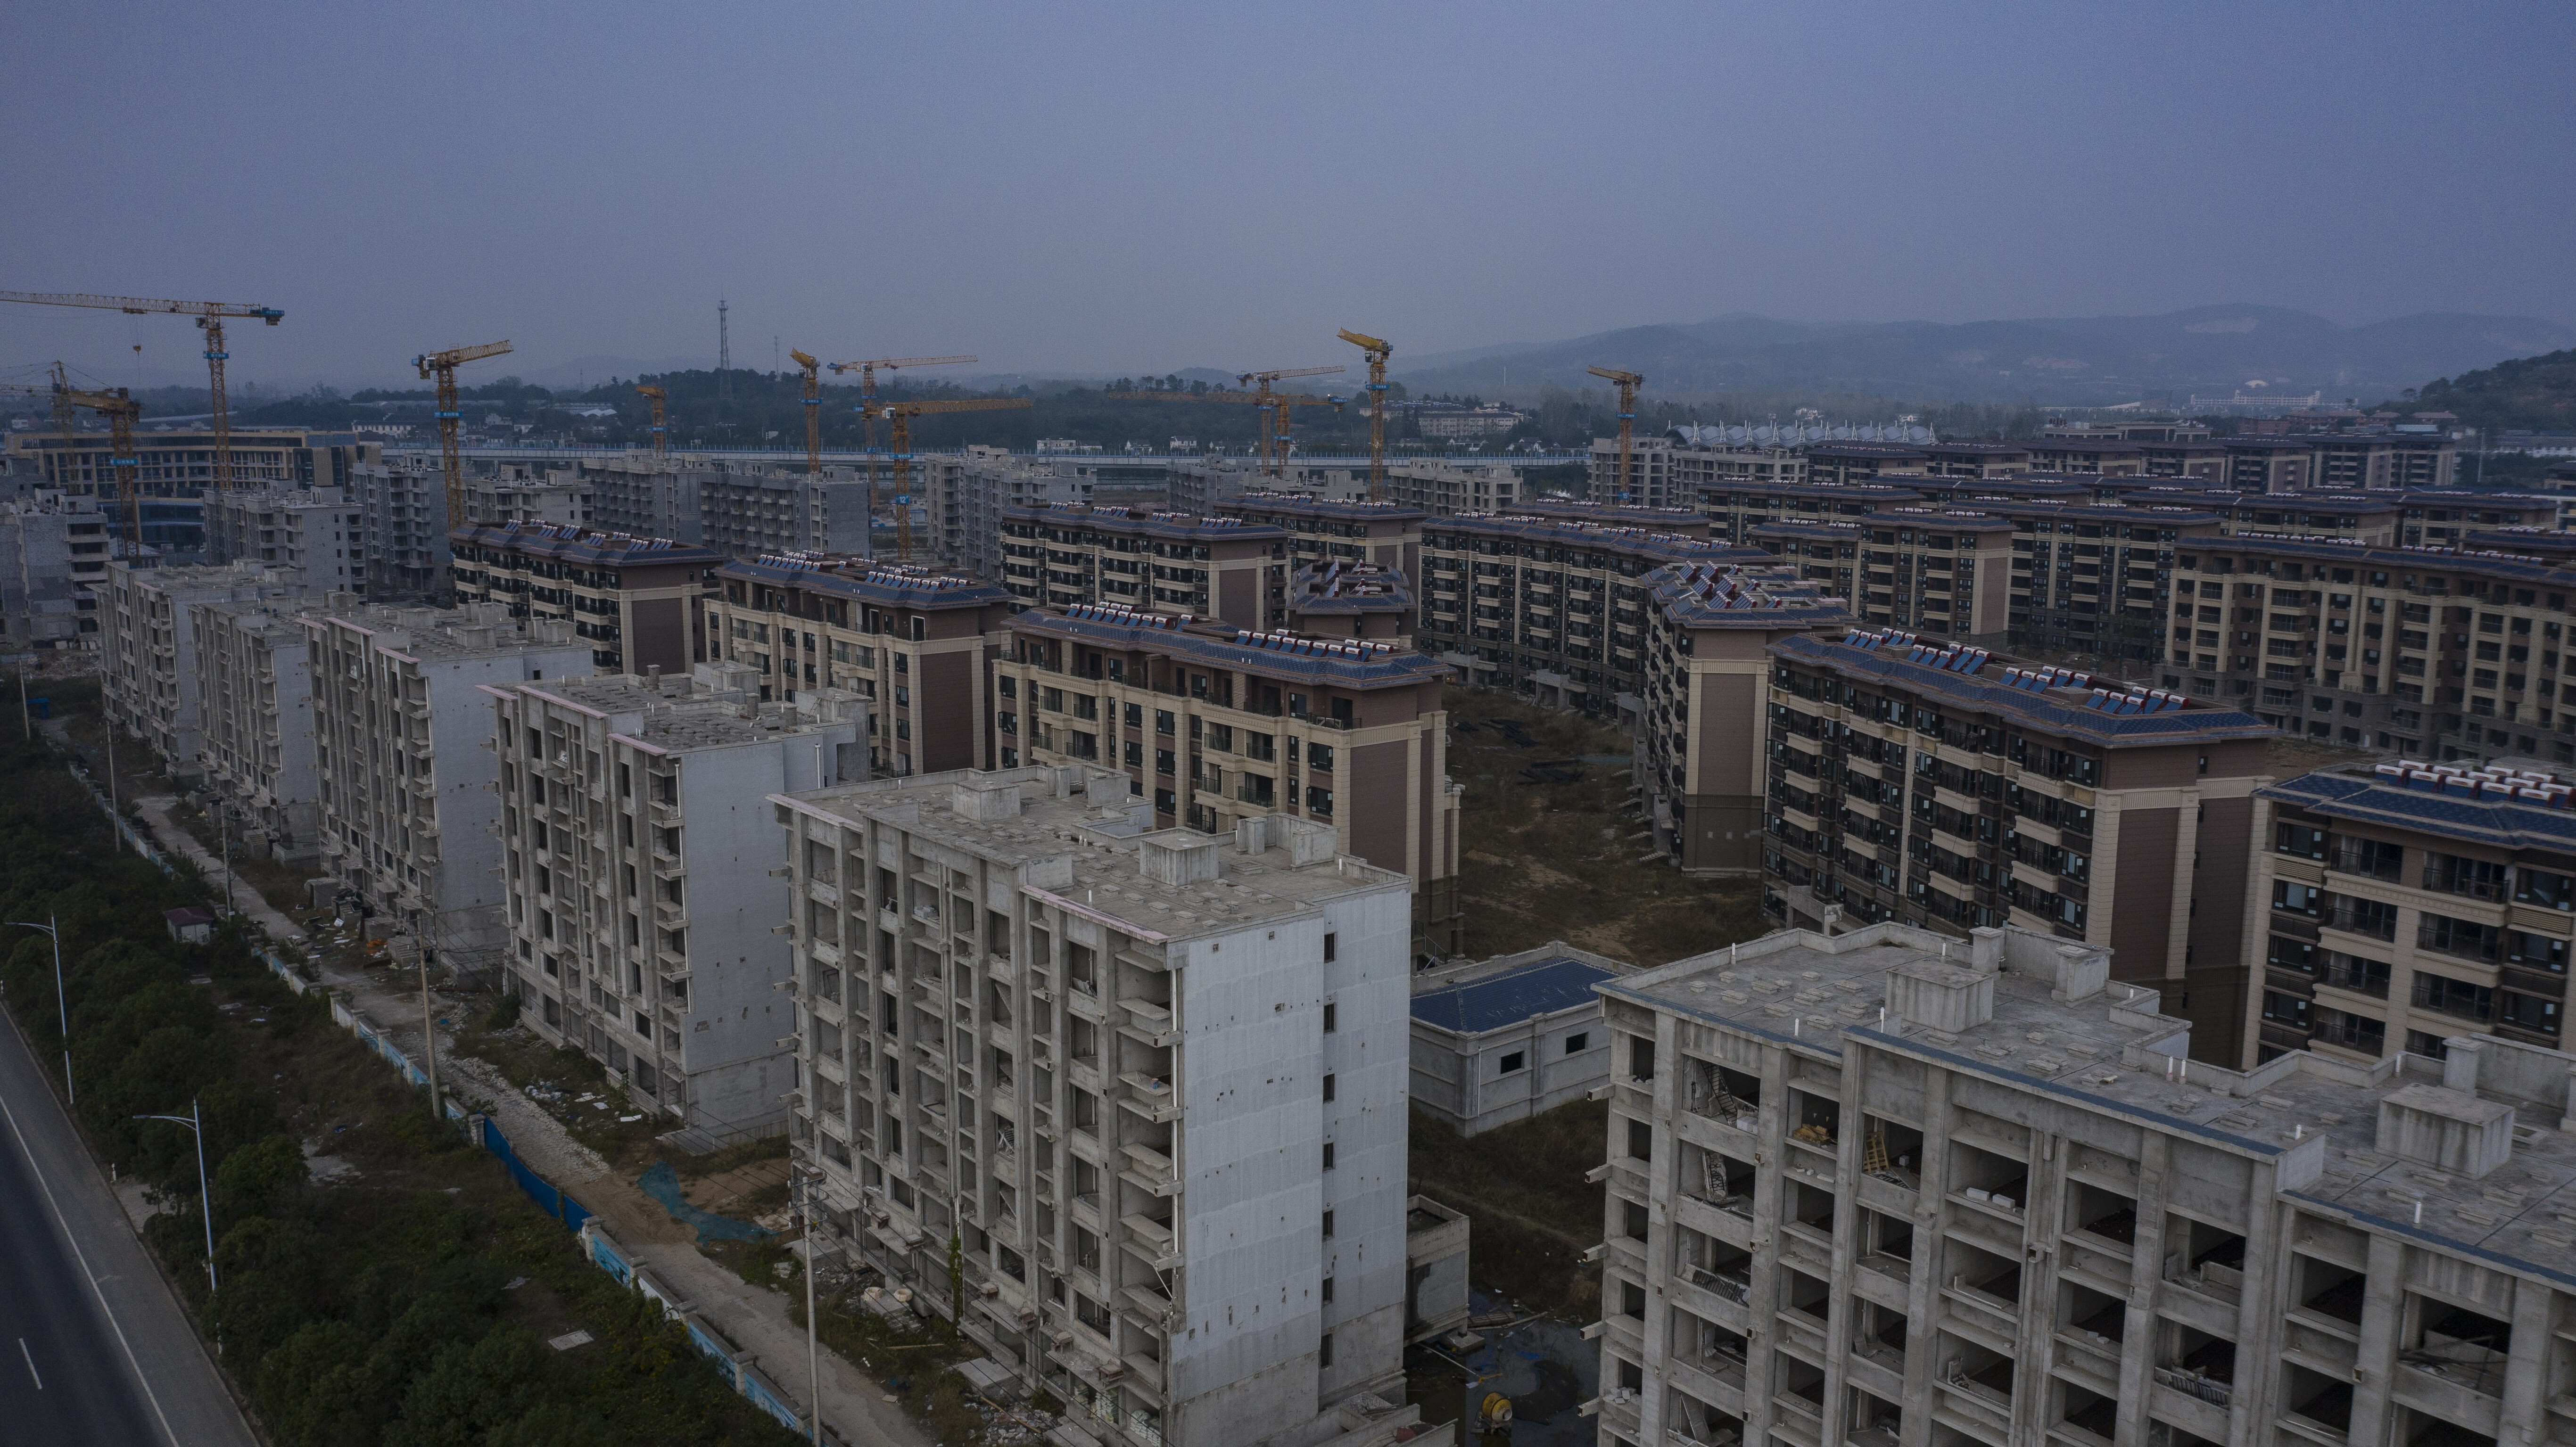 China’s property market has been a driver of wealth over the past two decades. Photo: Bloomberg